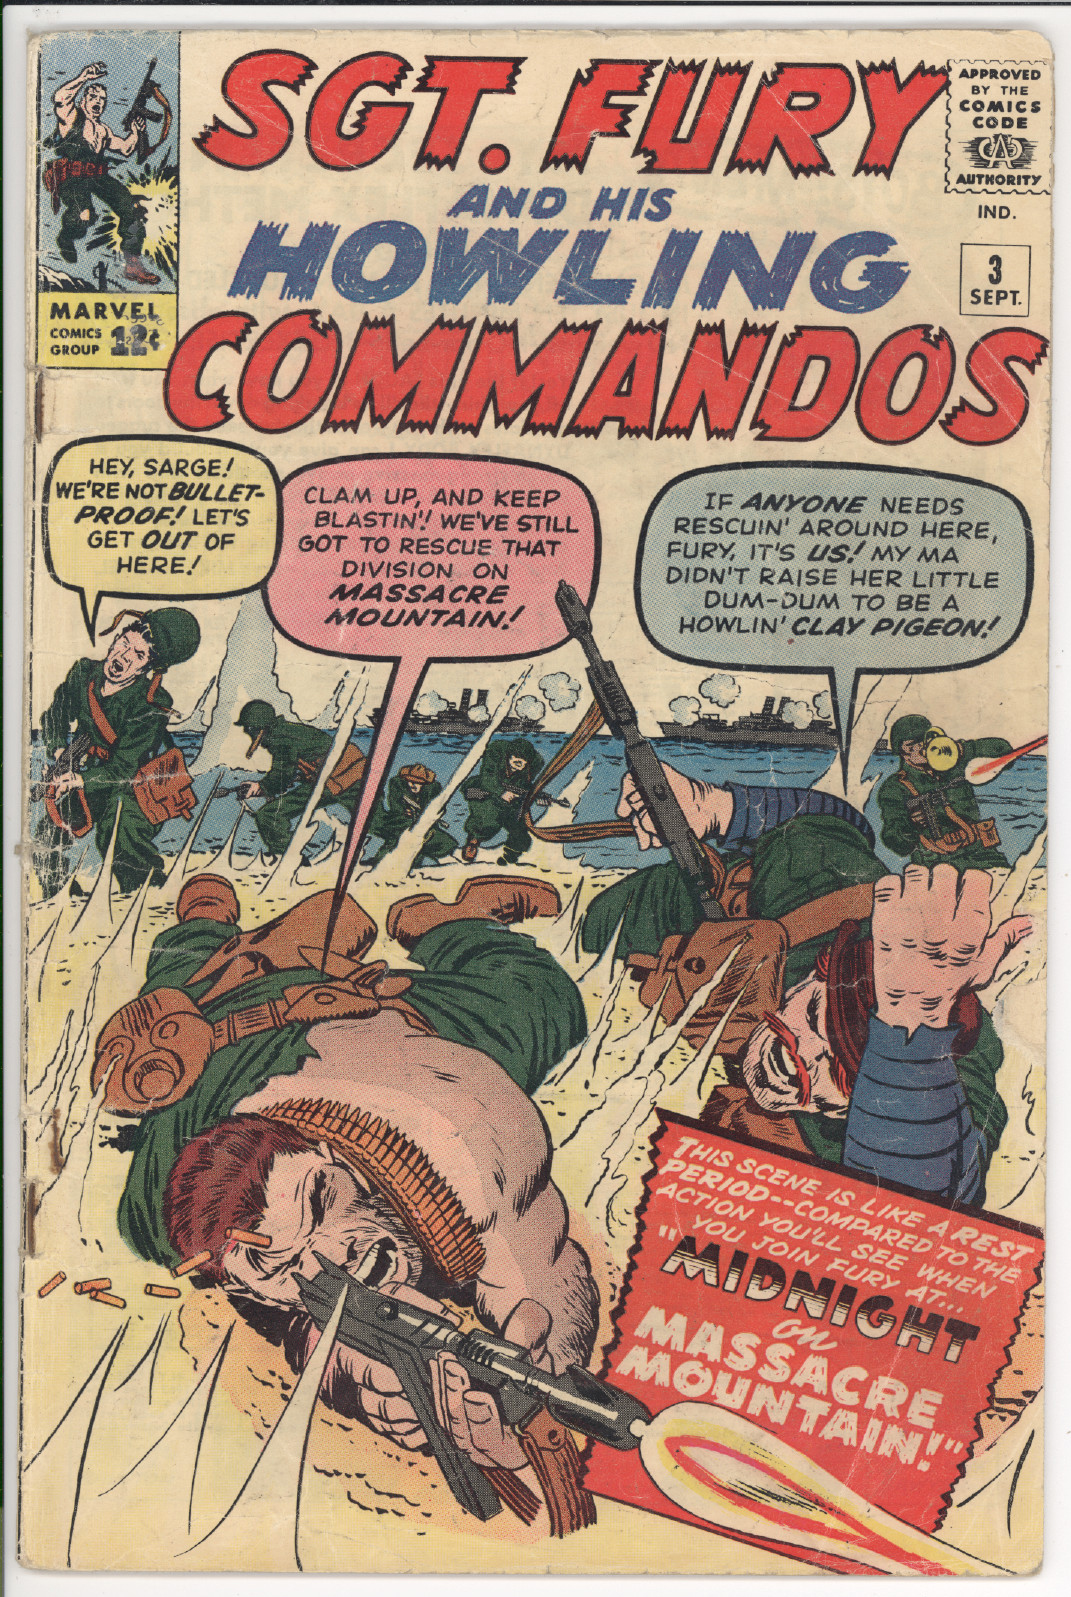 Sgt. Fury and his Howling Commandos   #3